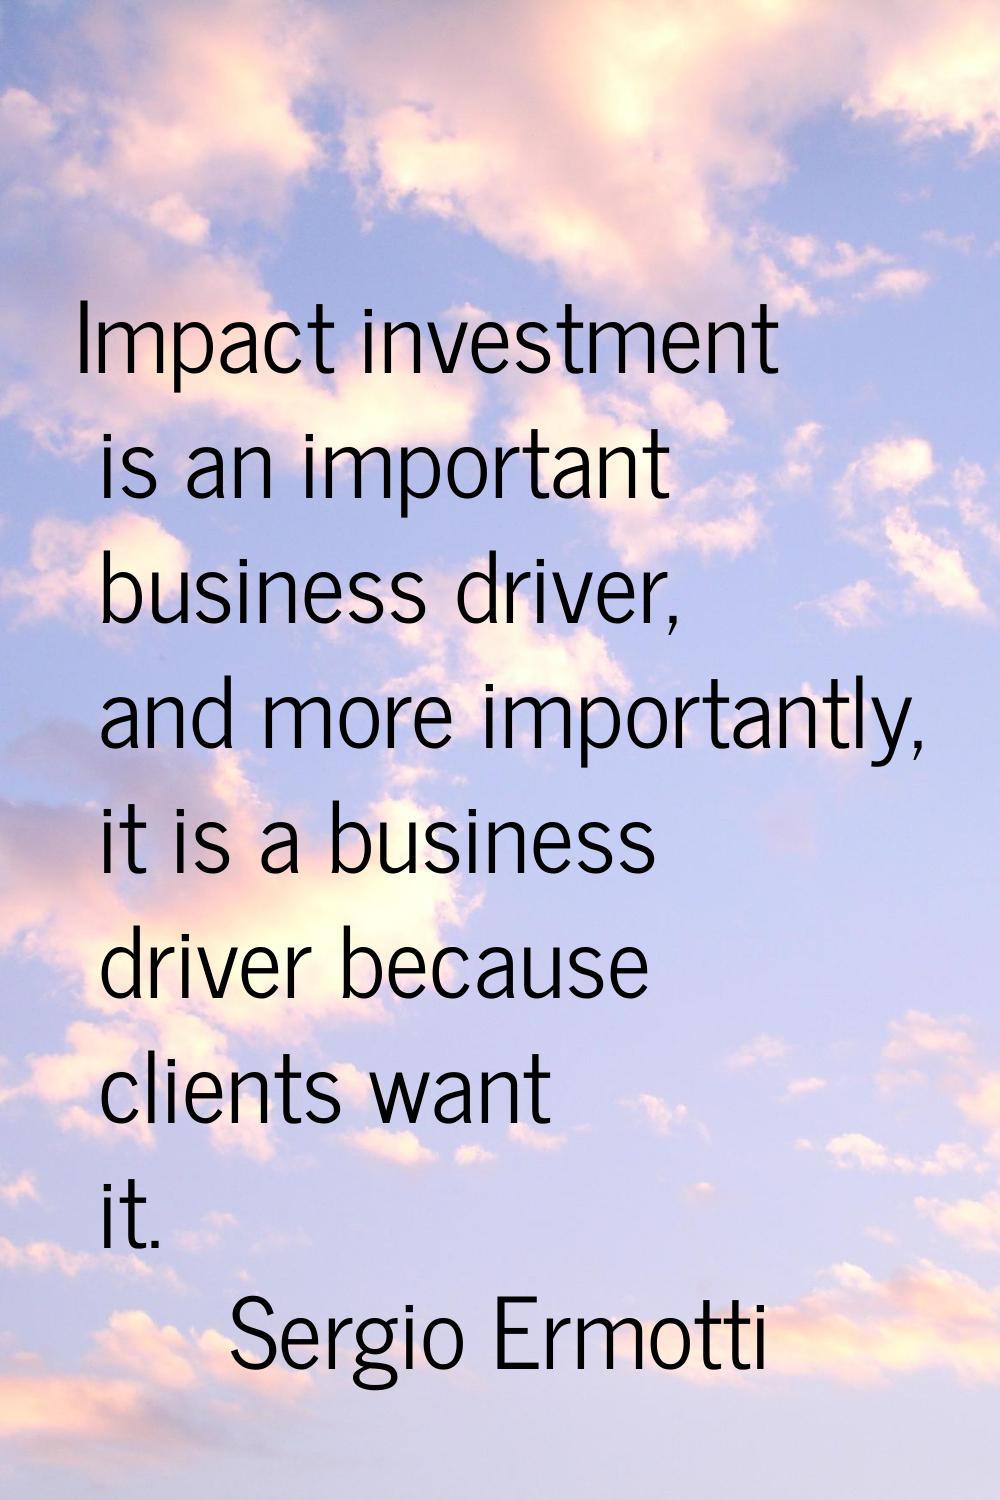 Impact investment is an important business driver, and more importantly, it is a business driver be